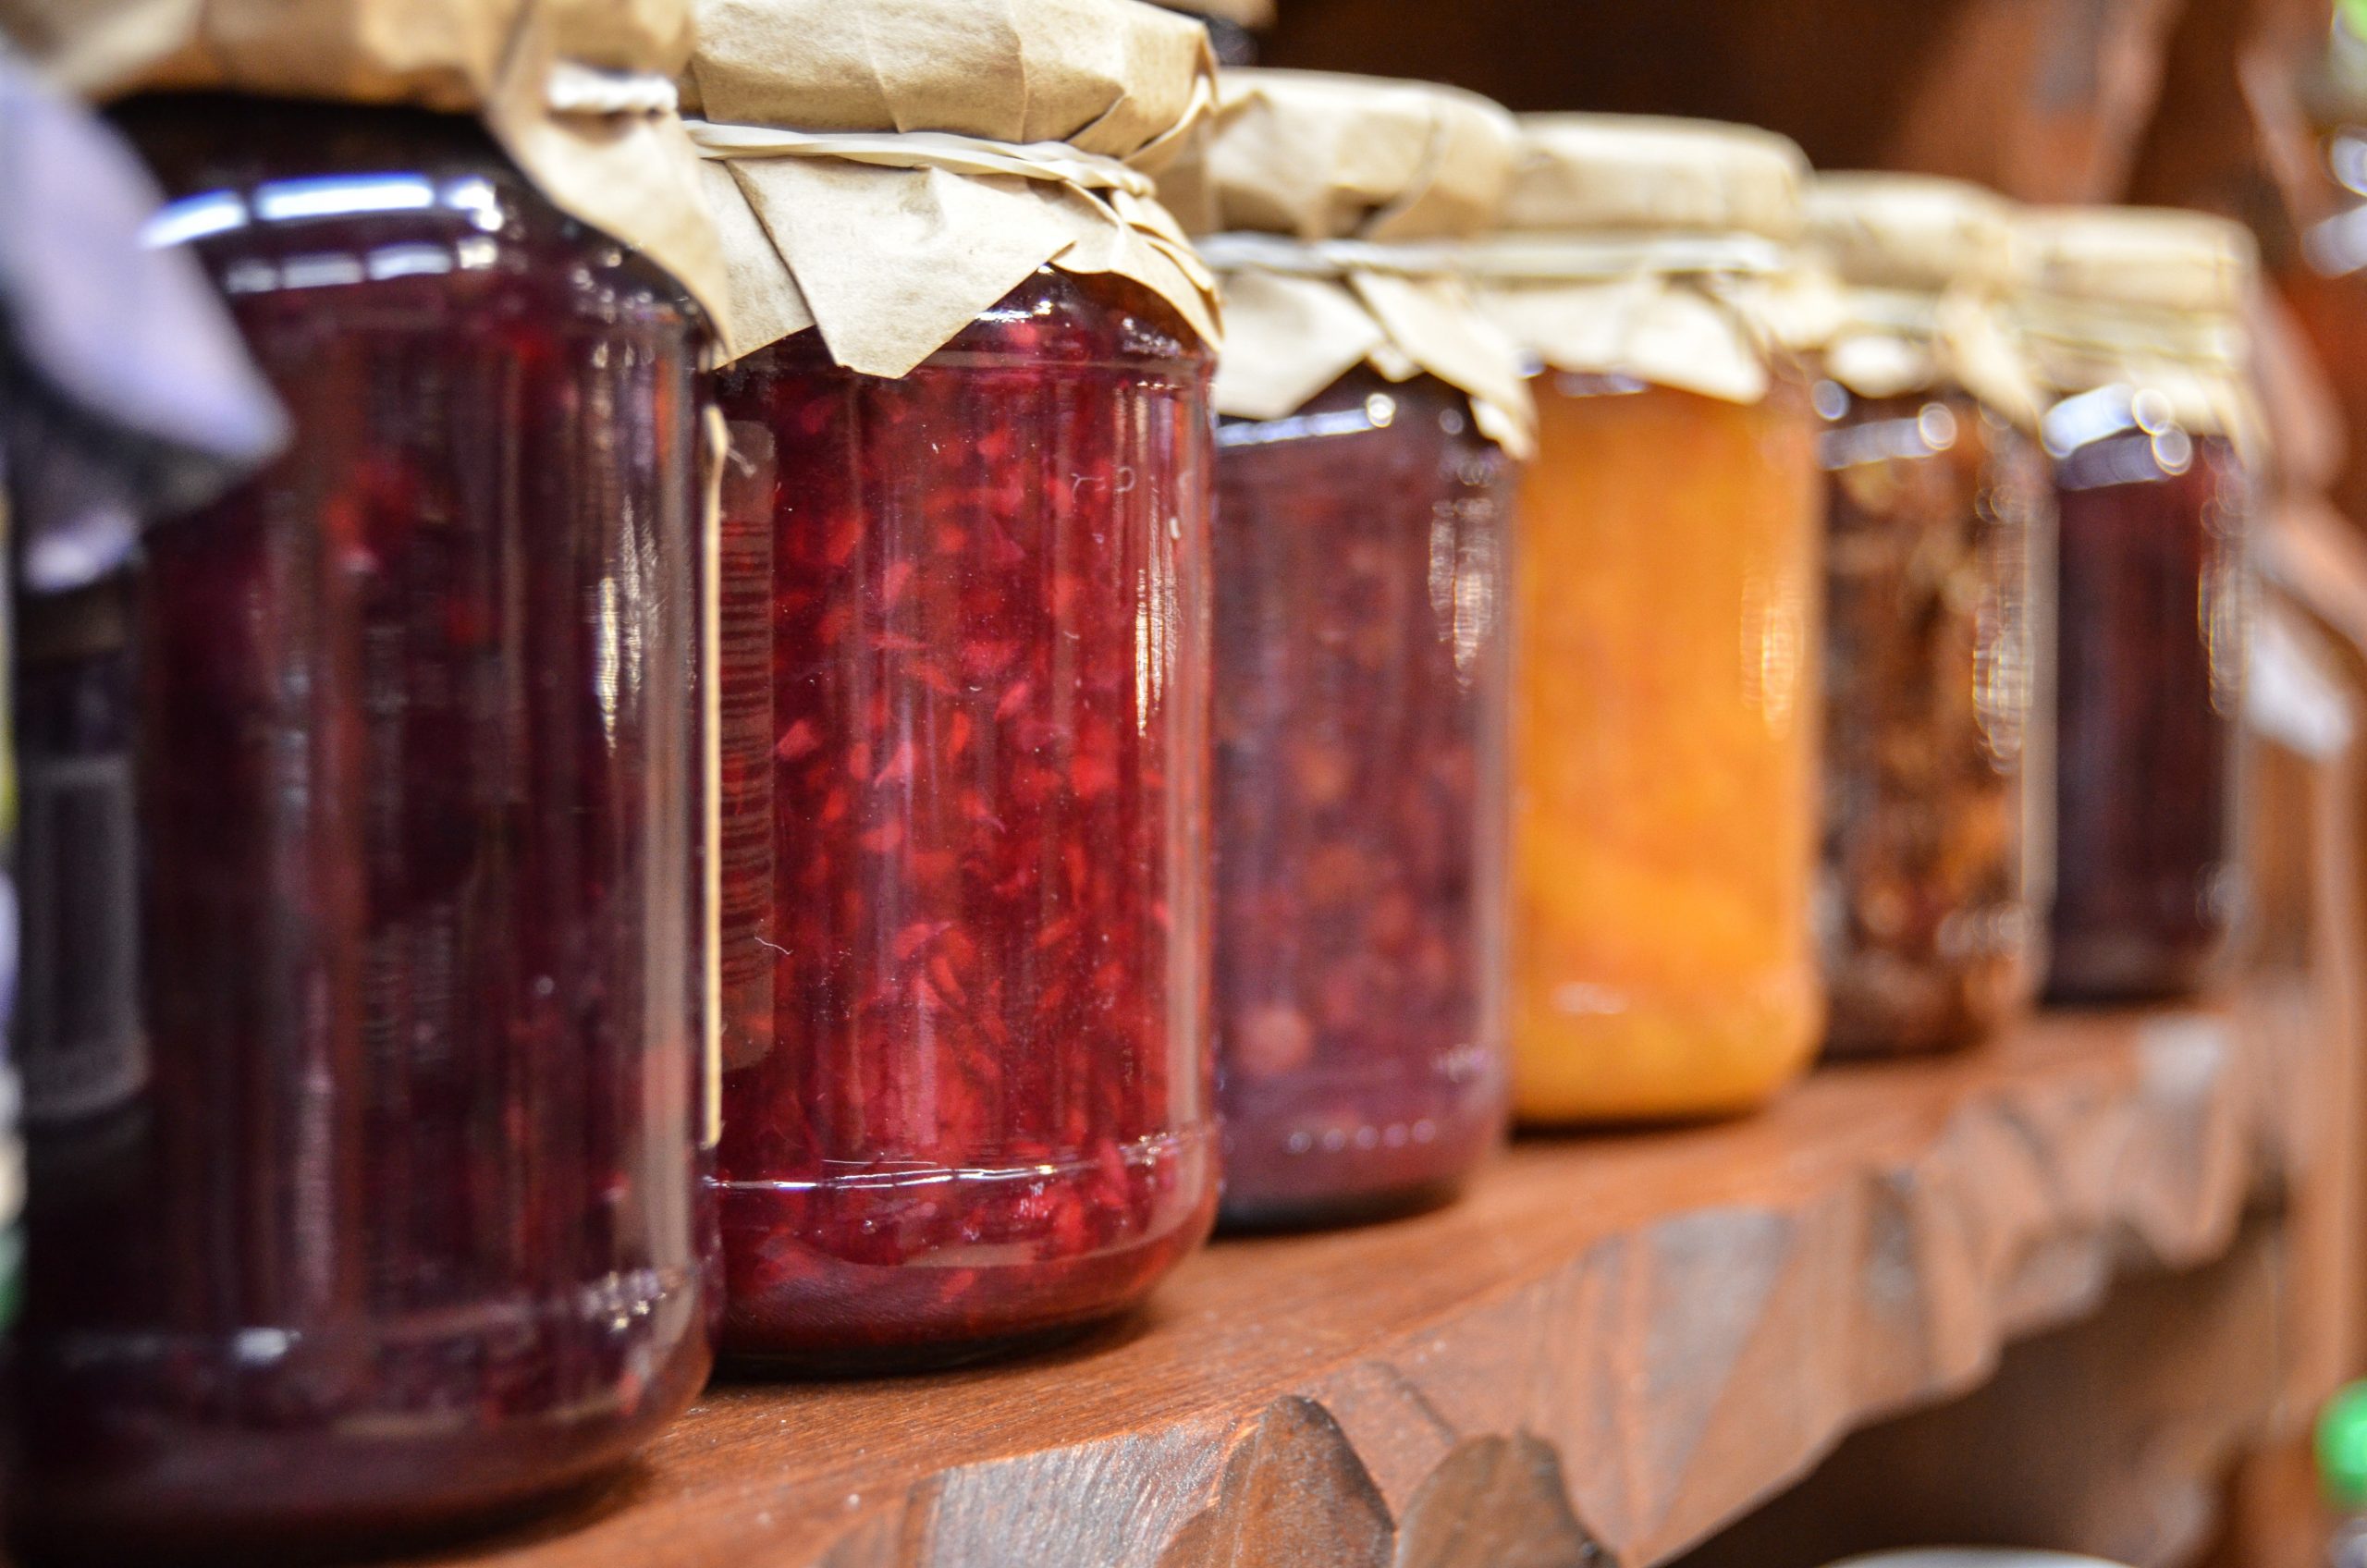 Jams and jellies lined up.